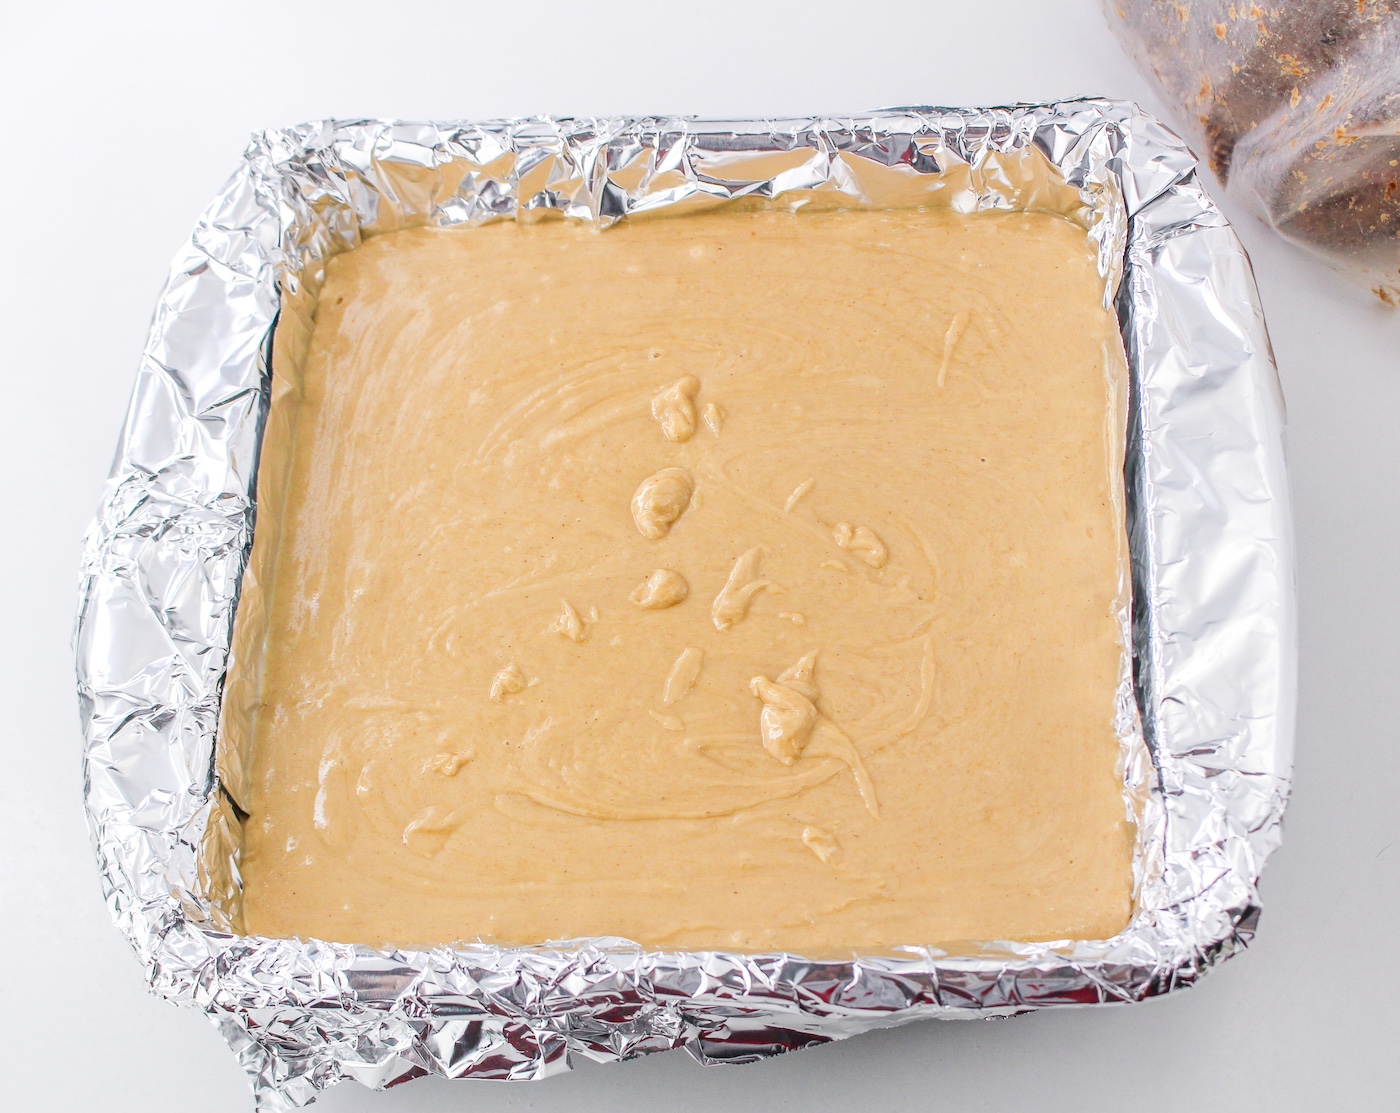 Pouring peanut butter fudge into a lined pan